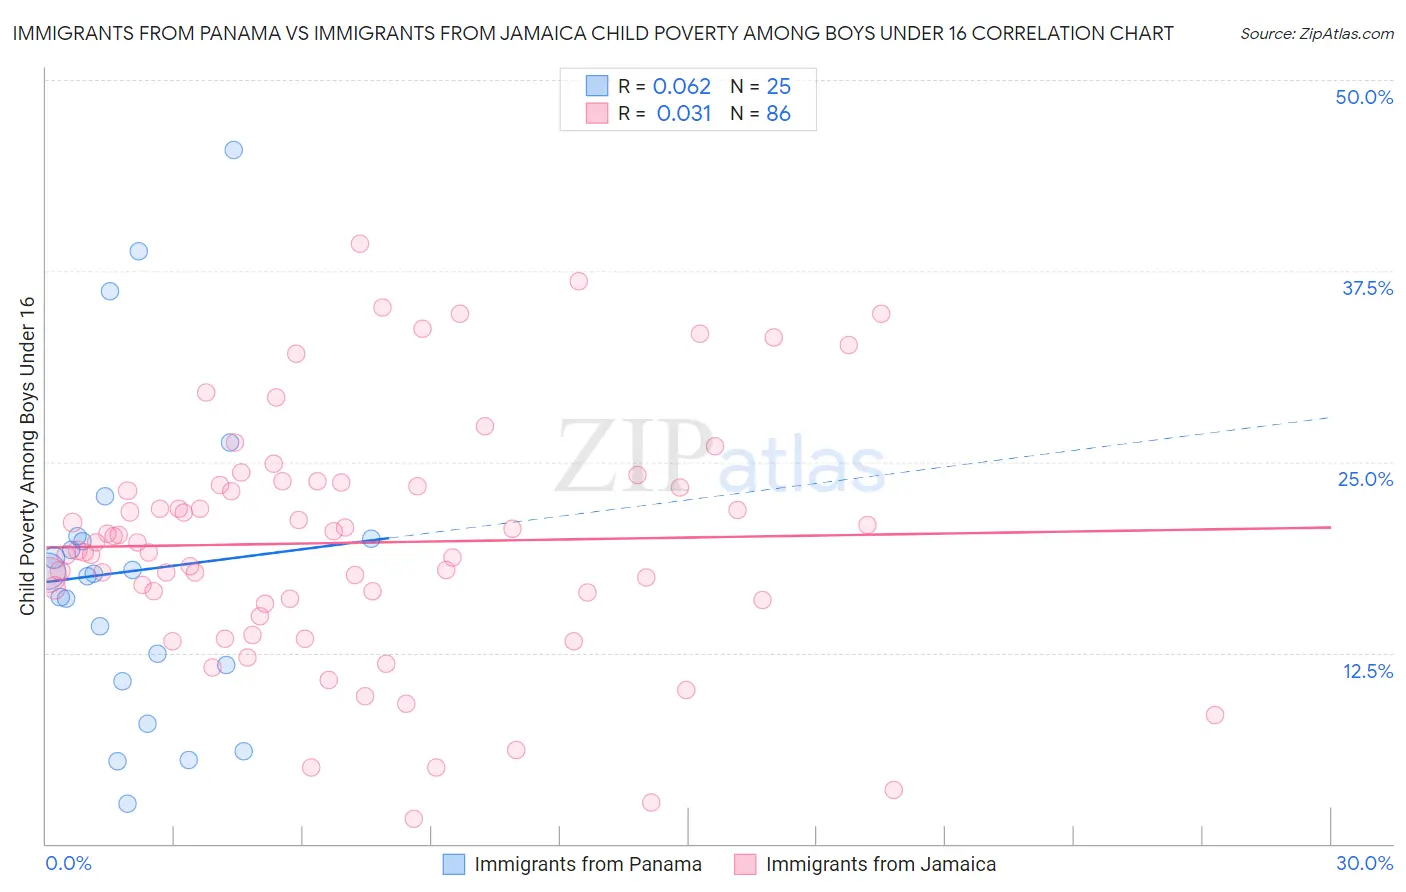 Immigrants from Panama vs Immigrants from Jamaica Child Poverty Among Boys Under 16